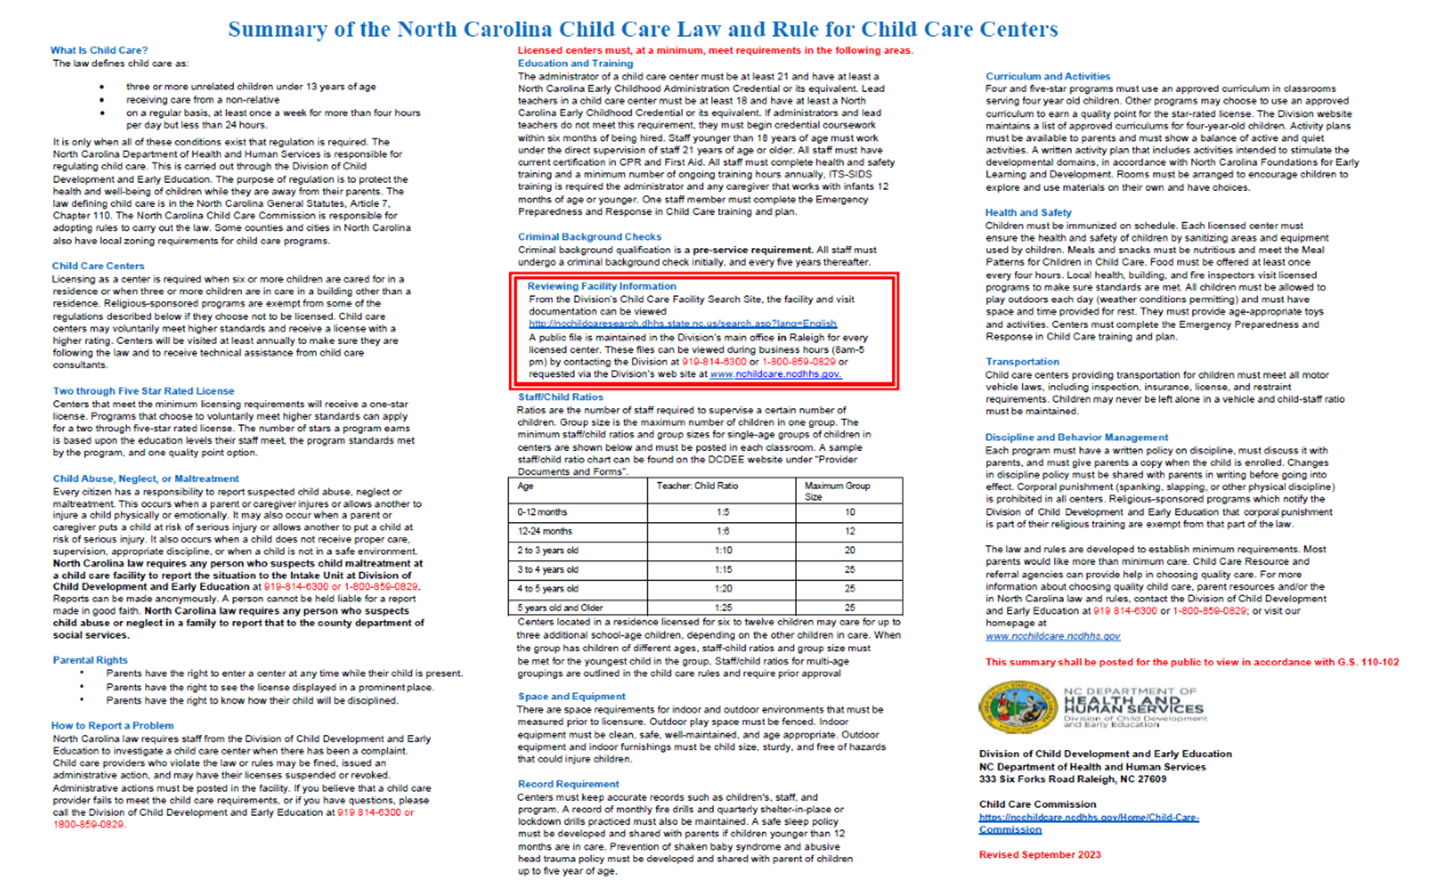 NC Child Care Law and Rules